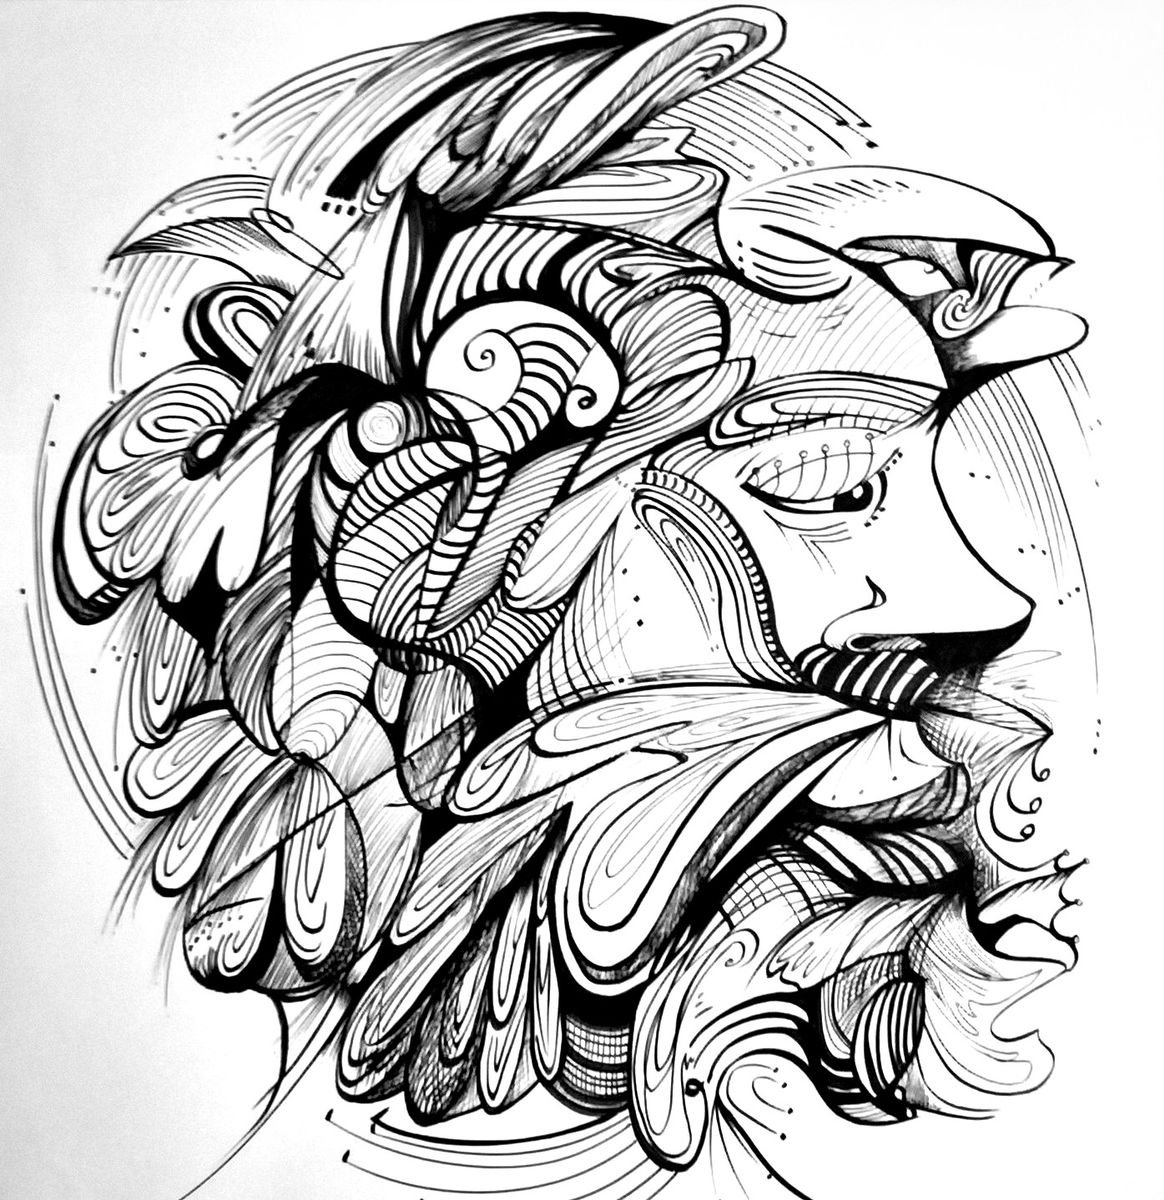 Nature of Man (Large Ink Drawing) by Midge